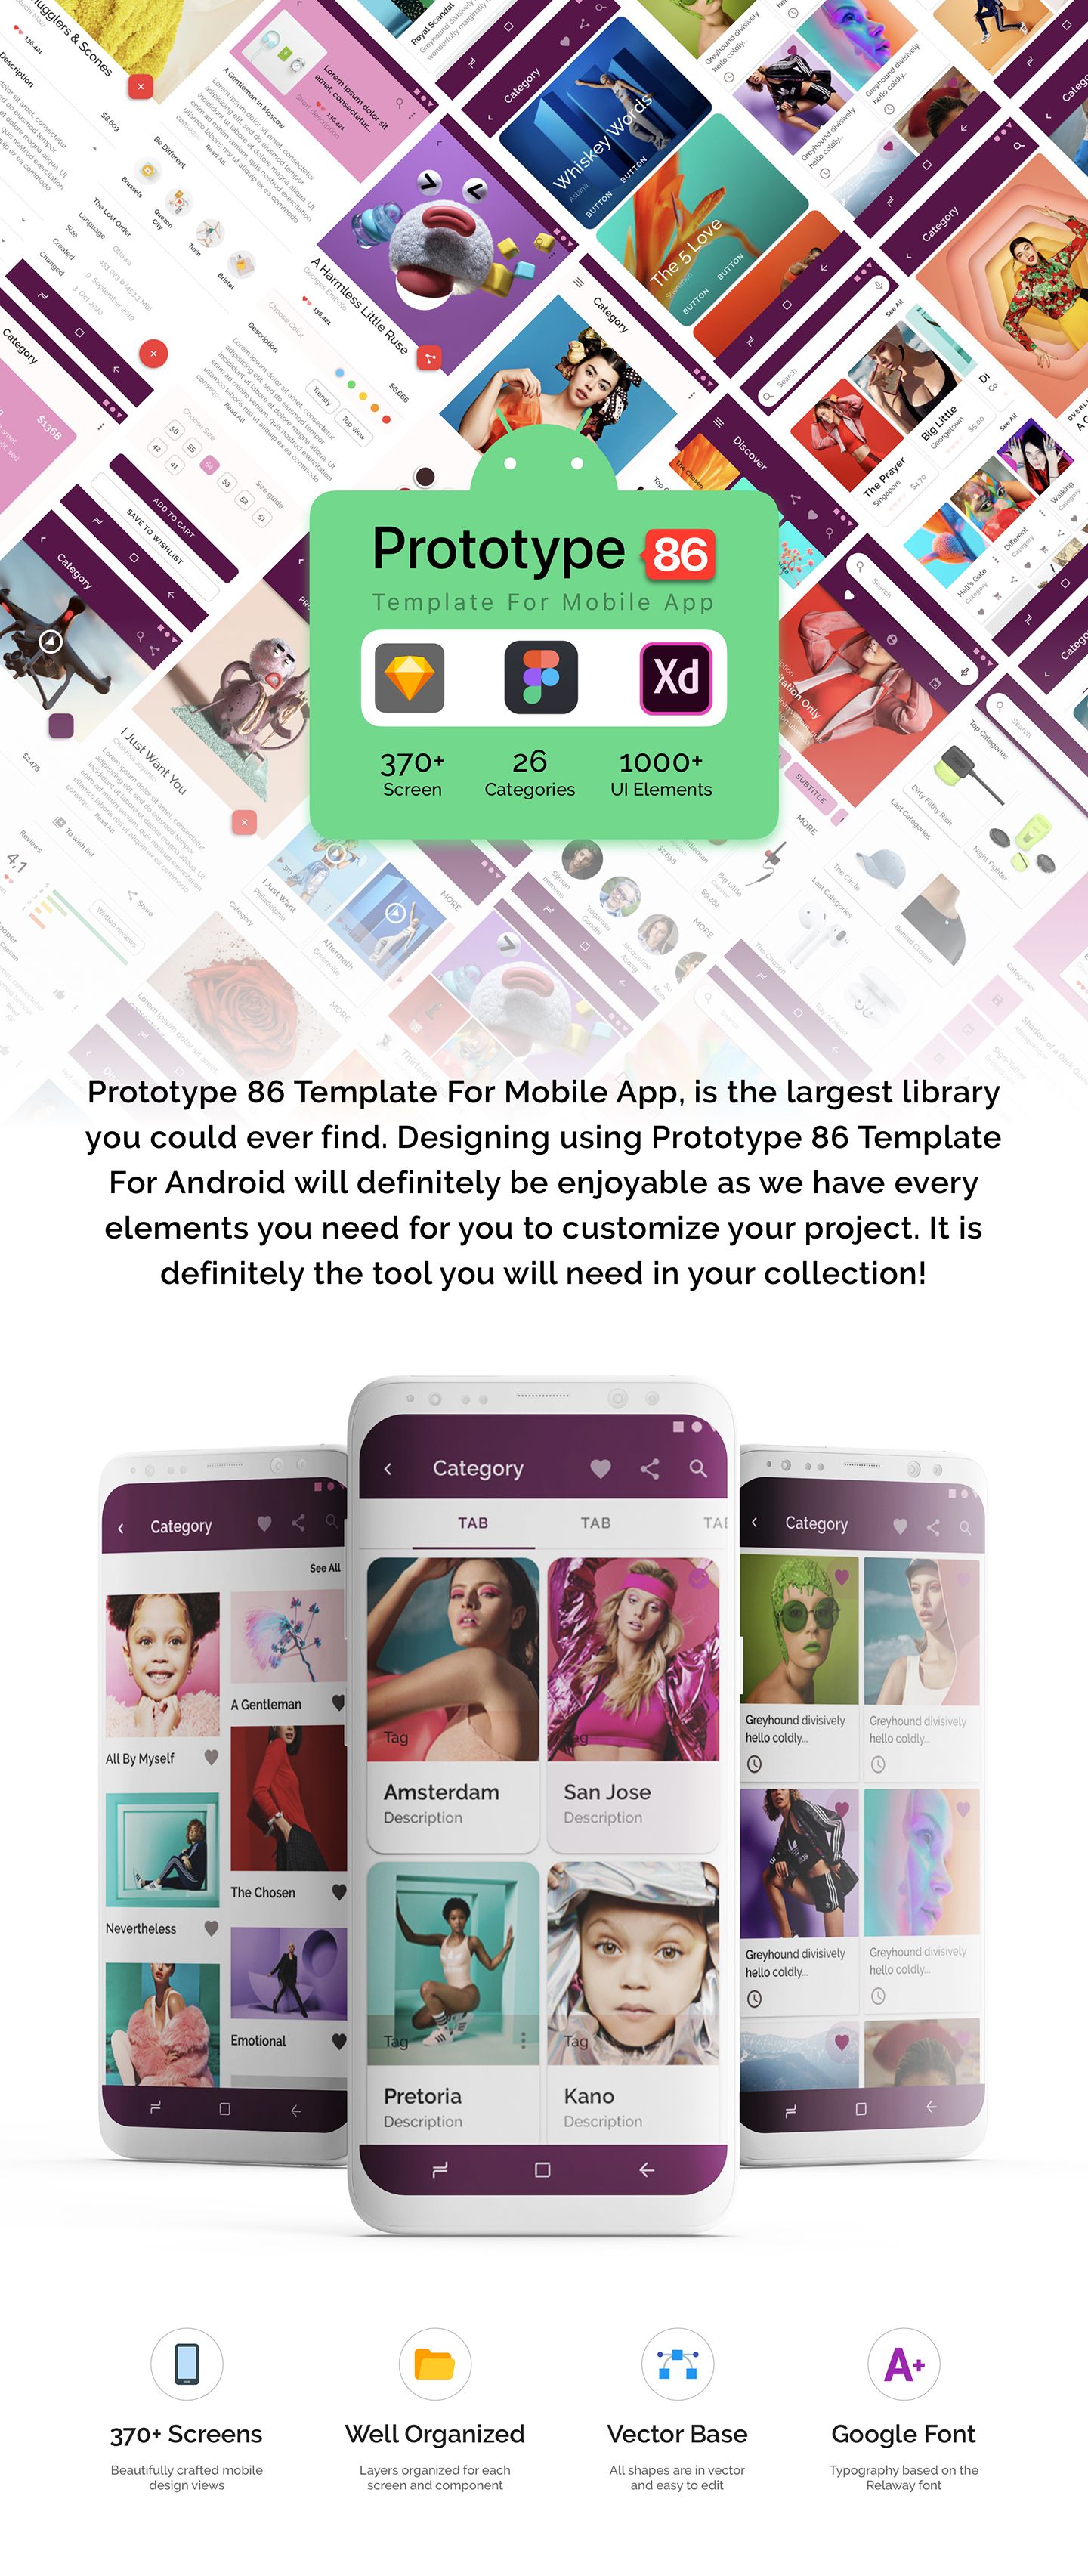 Prototype 86 - Template For Mobile App - 1